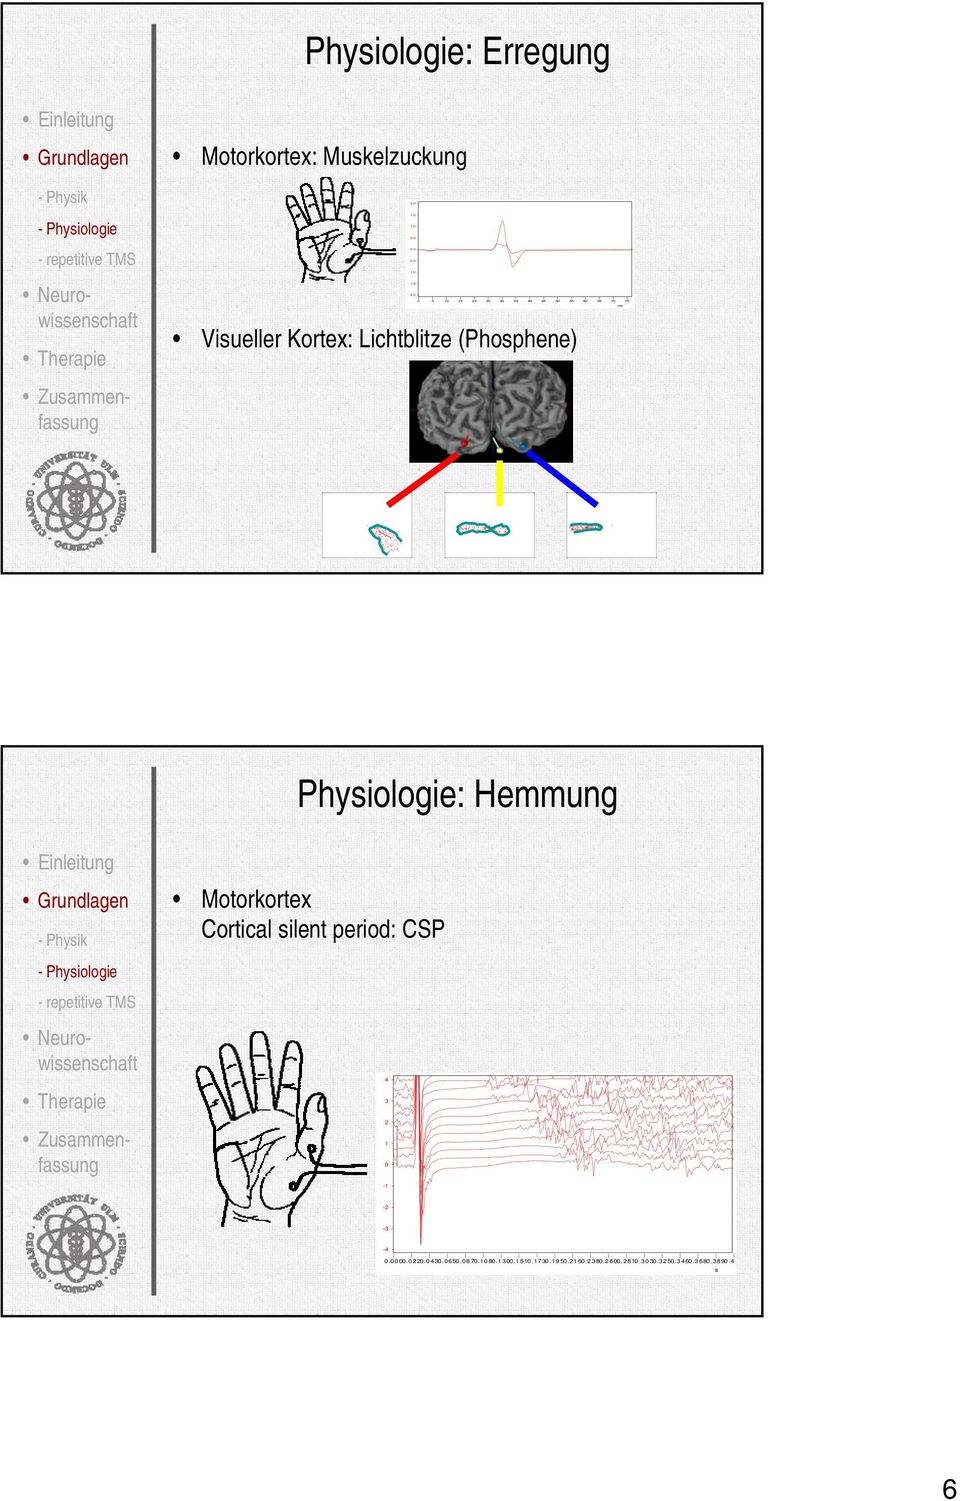 Physiologie: Hemmung - Physik Motorkortex Cortical silent period: CSP - Physiologie - repetitive TMS 4 3 2 1